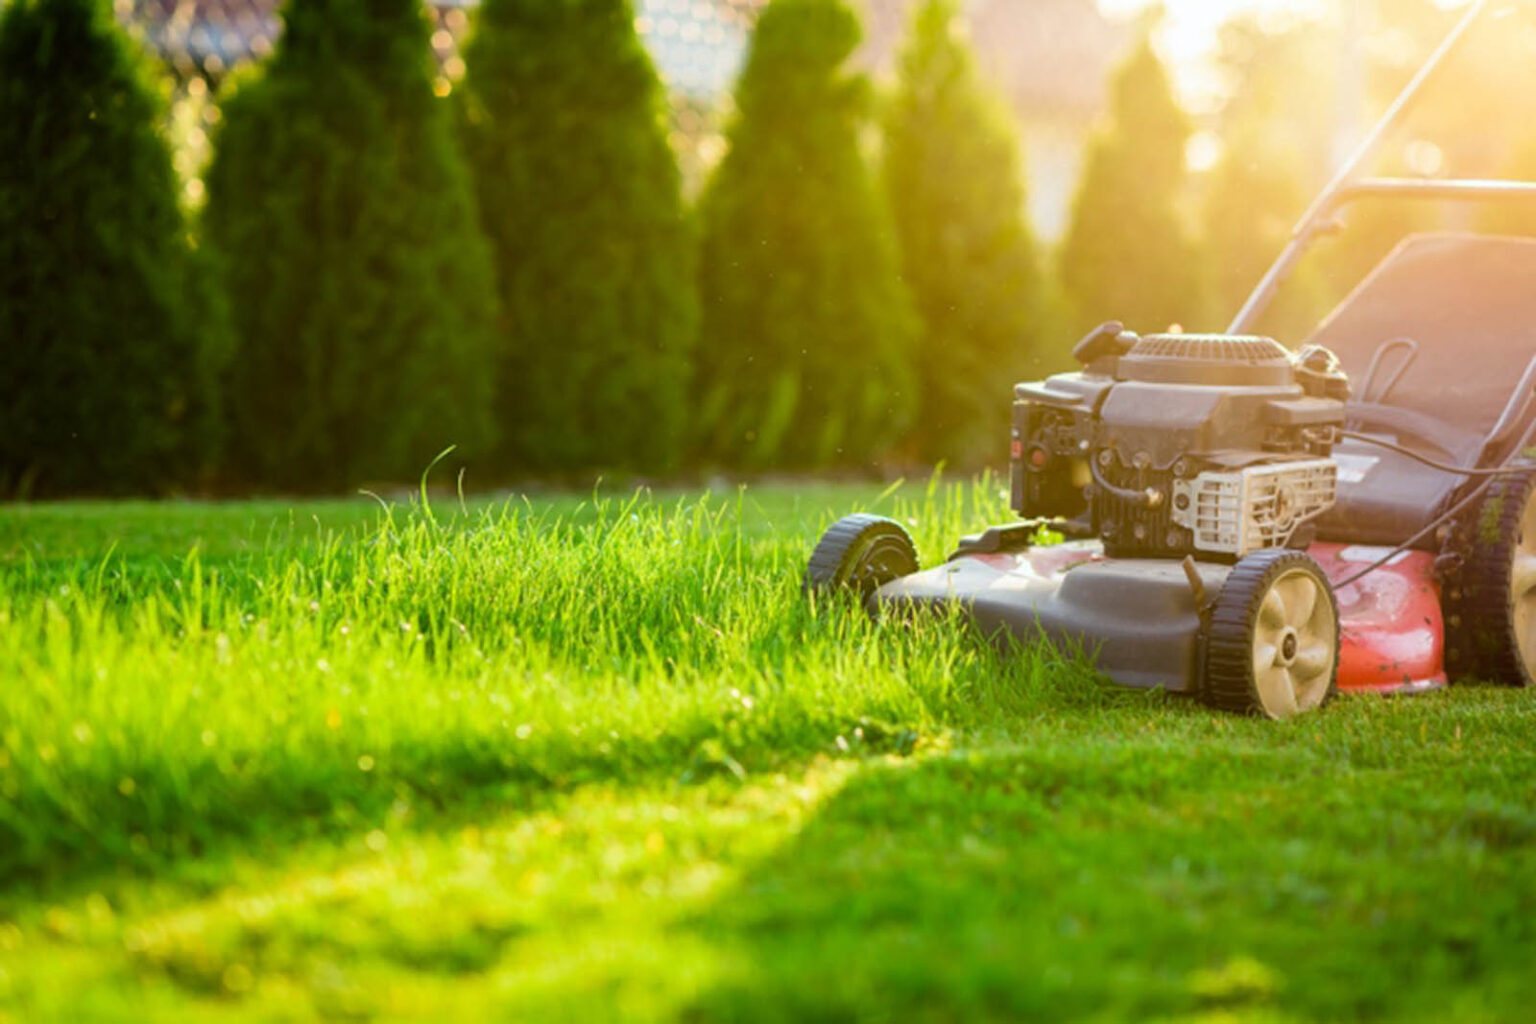 Are you considering investing in a lawn care maintenance company? Learn the facts about this potentially great investment opportunity!